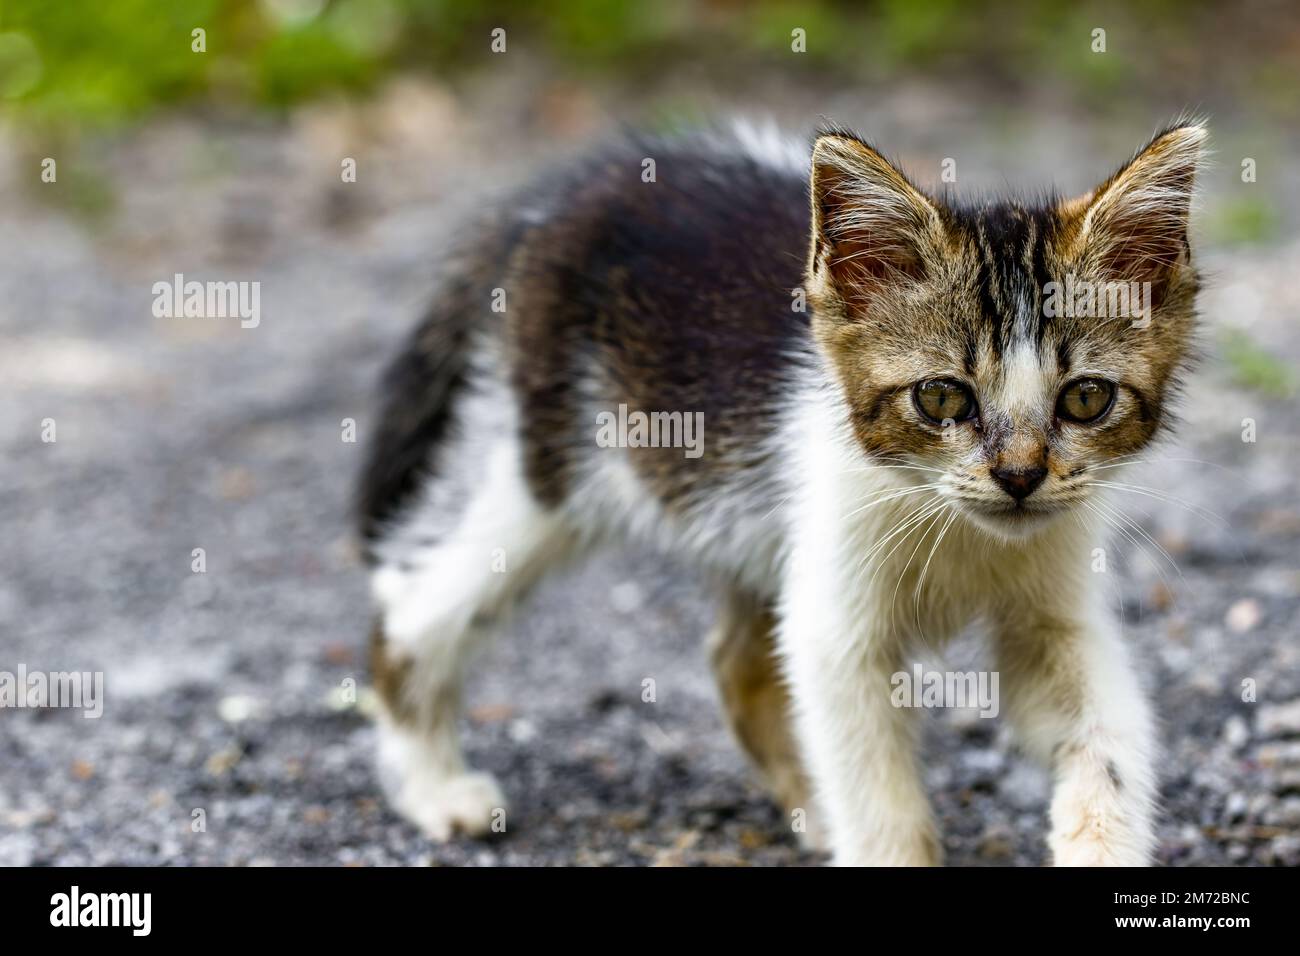 A kitten with a combination of white, black and brown is standing on dry sandy ground, selective focus with a blurry background Stock Photo